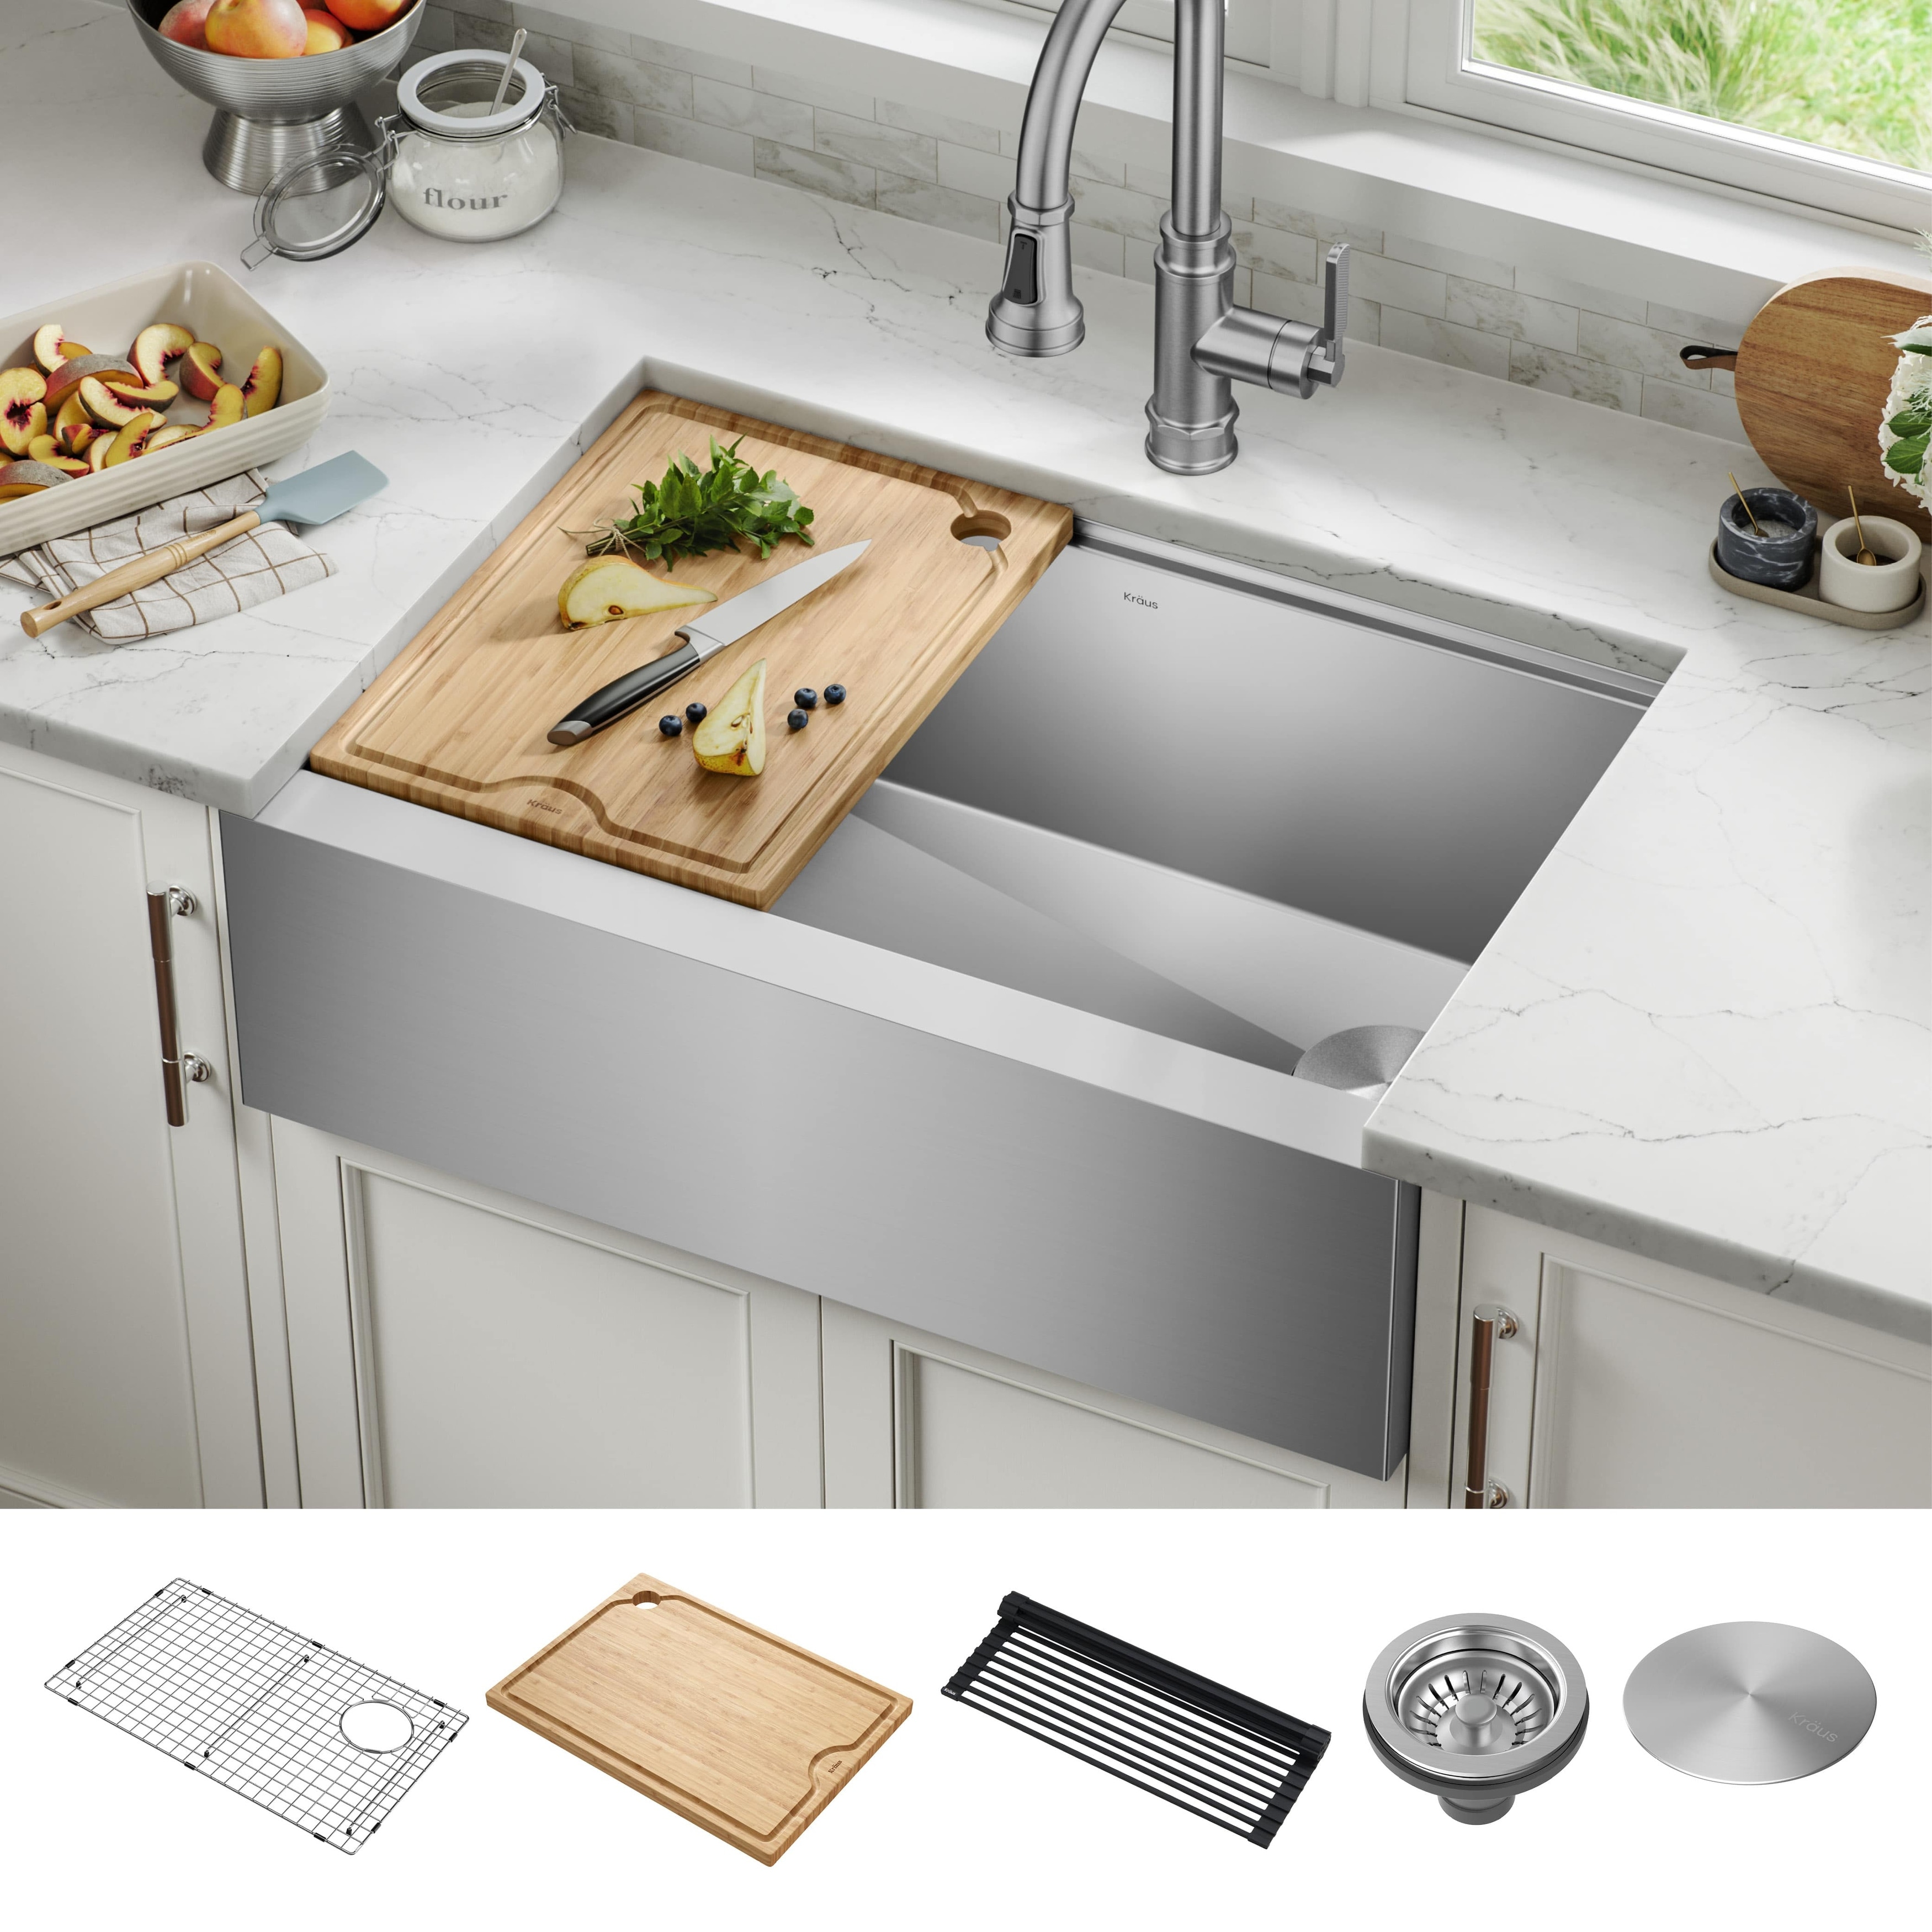 https://ak1.ostkcdn.com/images/products/is/images/direct/18d2f3da426735b8eca3fe32f4ce0bc721d68733/KRAUS-Kore-Stainless-Steel-Farmhouse-Kitchen-Sink-with-Accessories.jpg